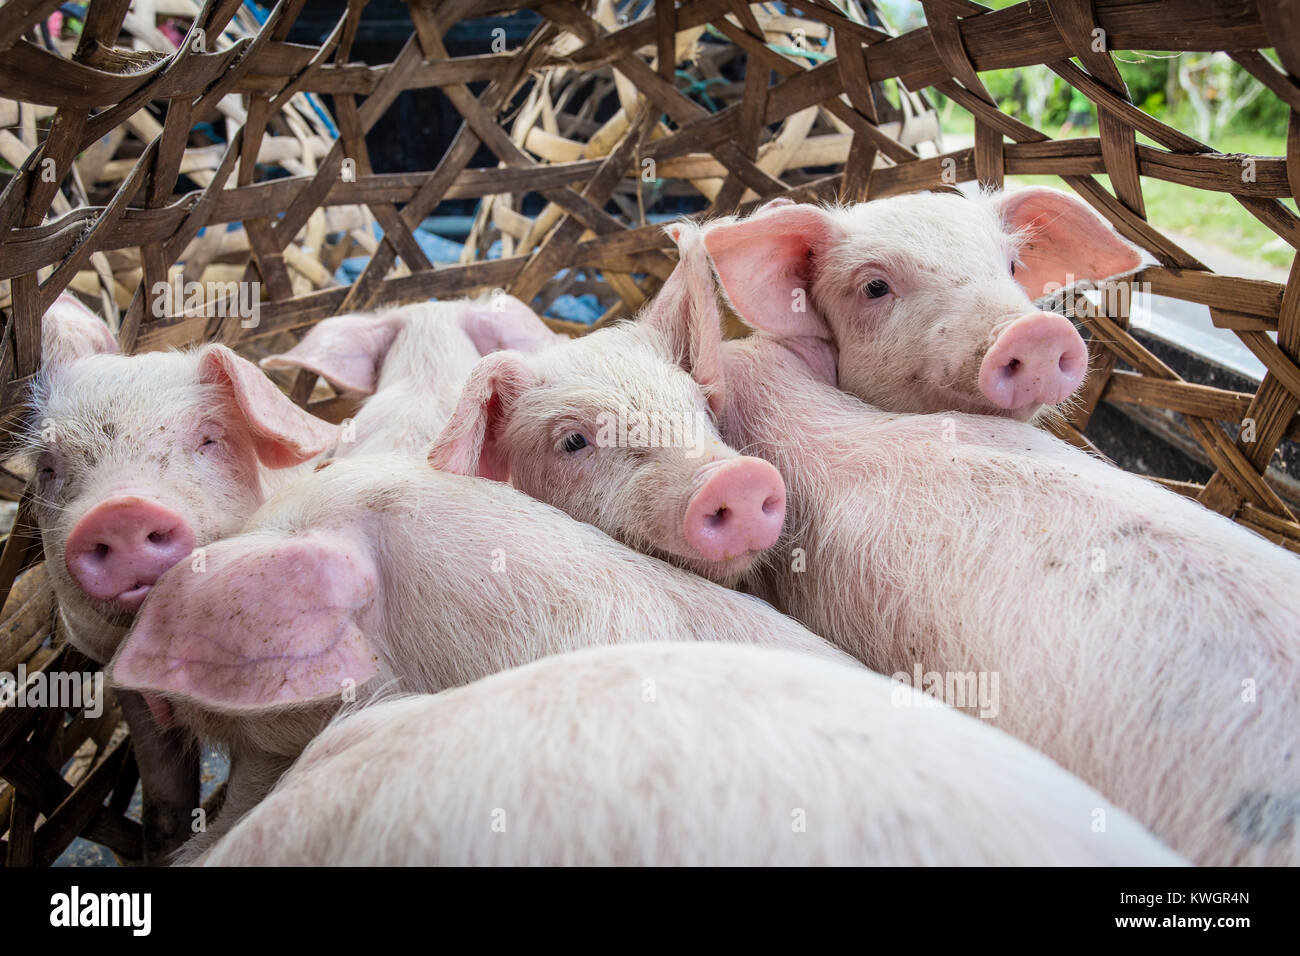 Cute piglets inside a bamboo cage, ready for transportation Stock Photo